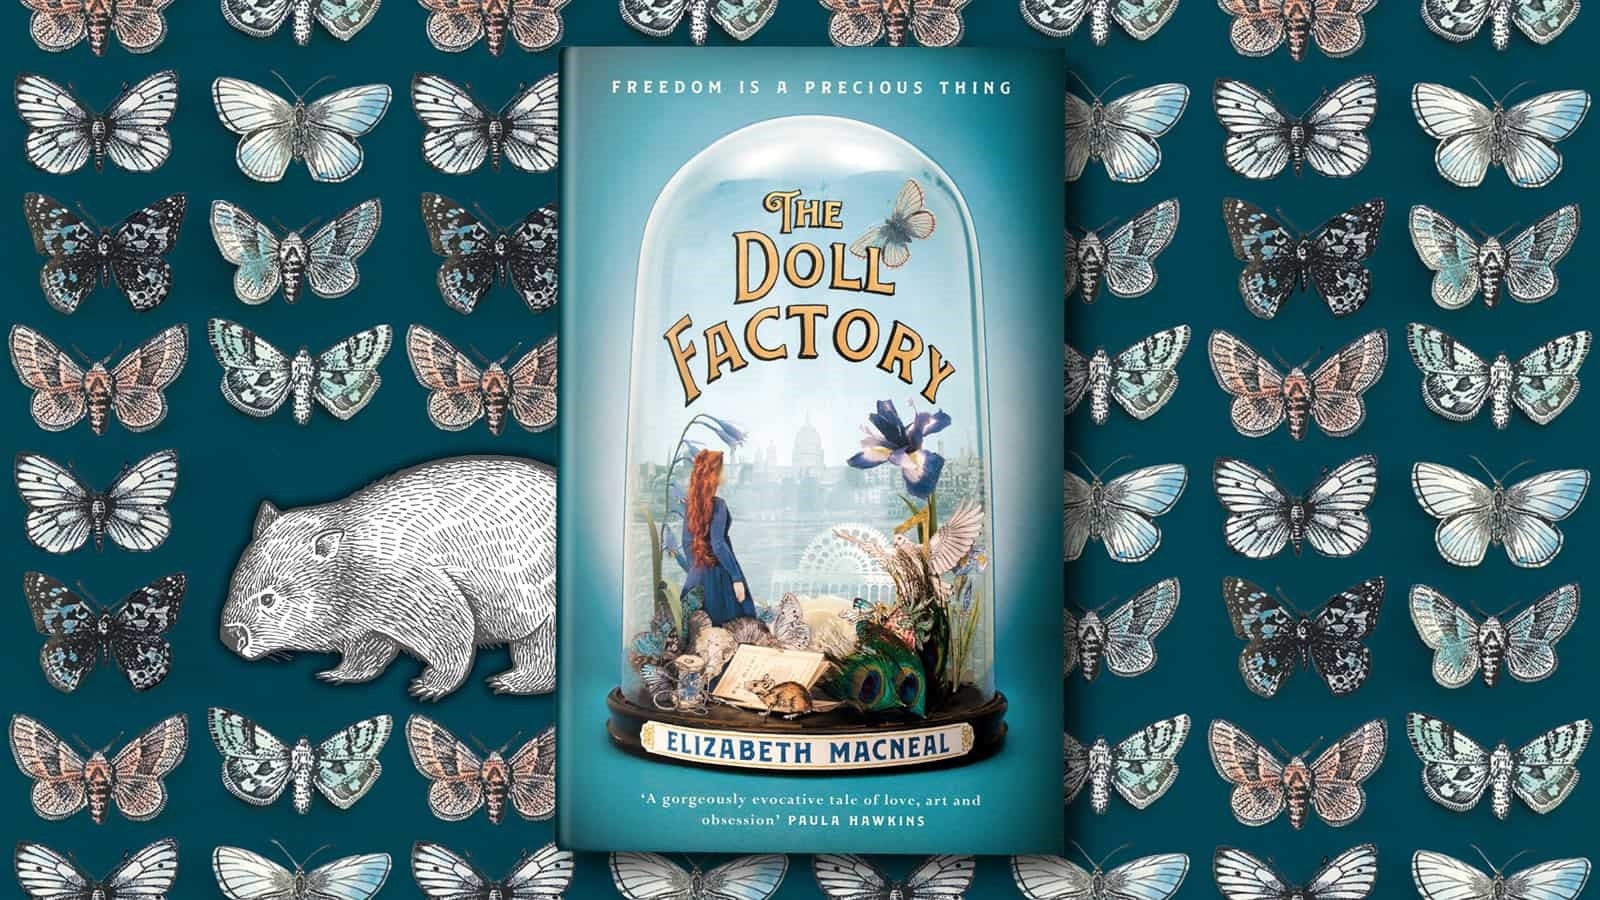 The Doll Factory book cover against an illustration of butterflies and a wombat